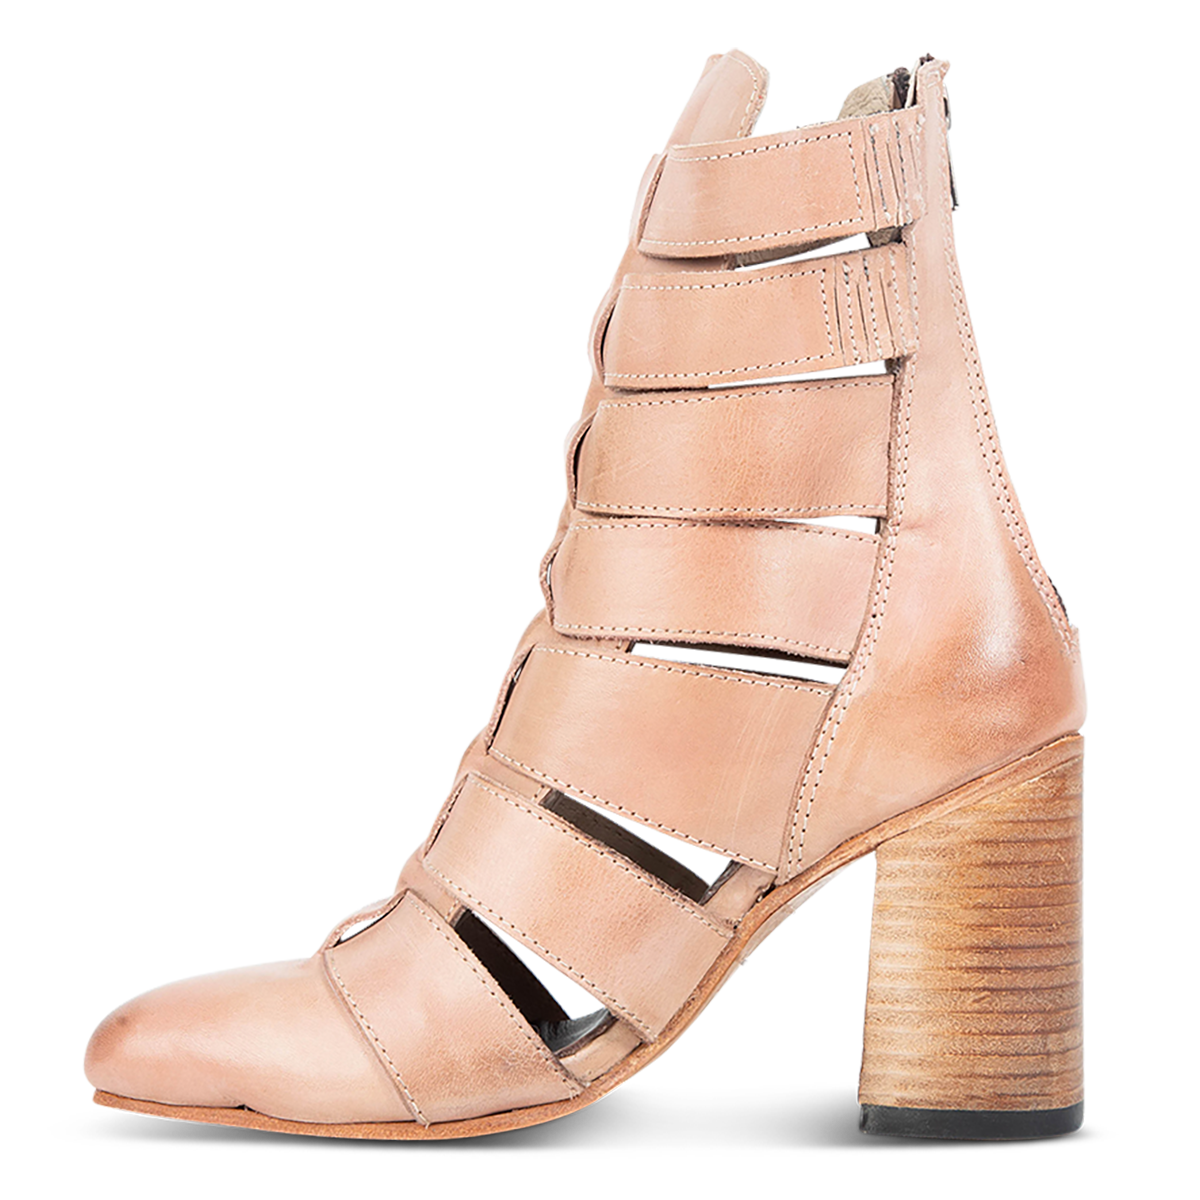 Inside view showing elastic gore detailing on FREEBIRD women's Jagger blush leather pointed toe bootie